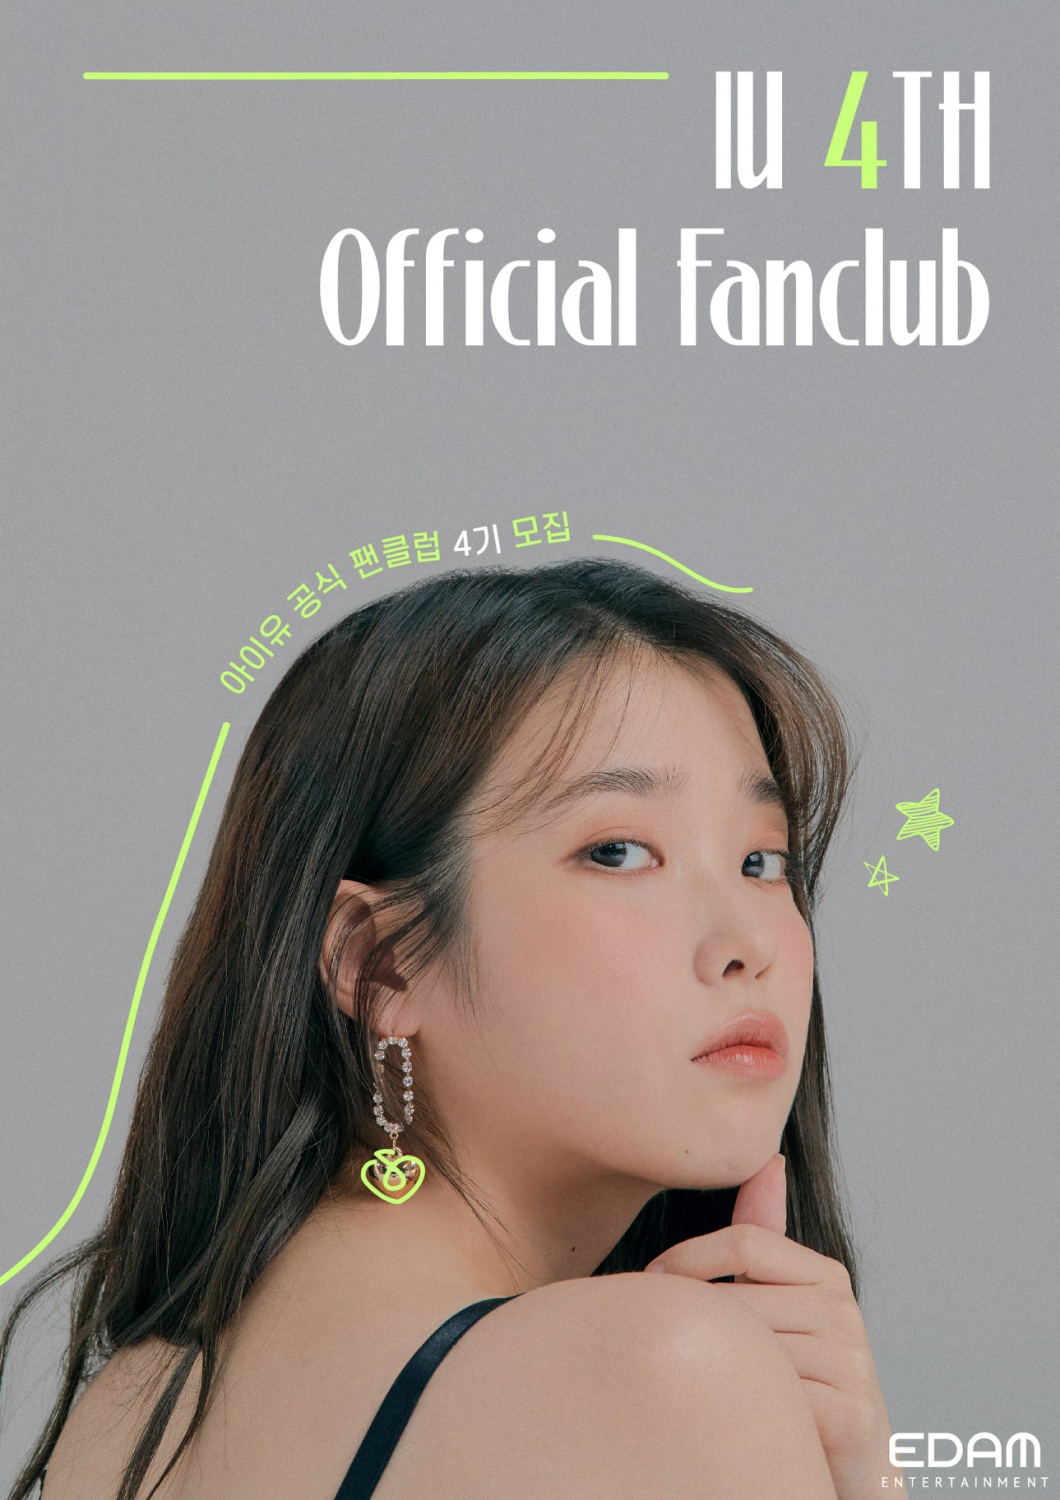 IU ‘Celebrity’ unquestionably all-kill on the charts, reaching No. 1 Melon 24Hits in 3 hours